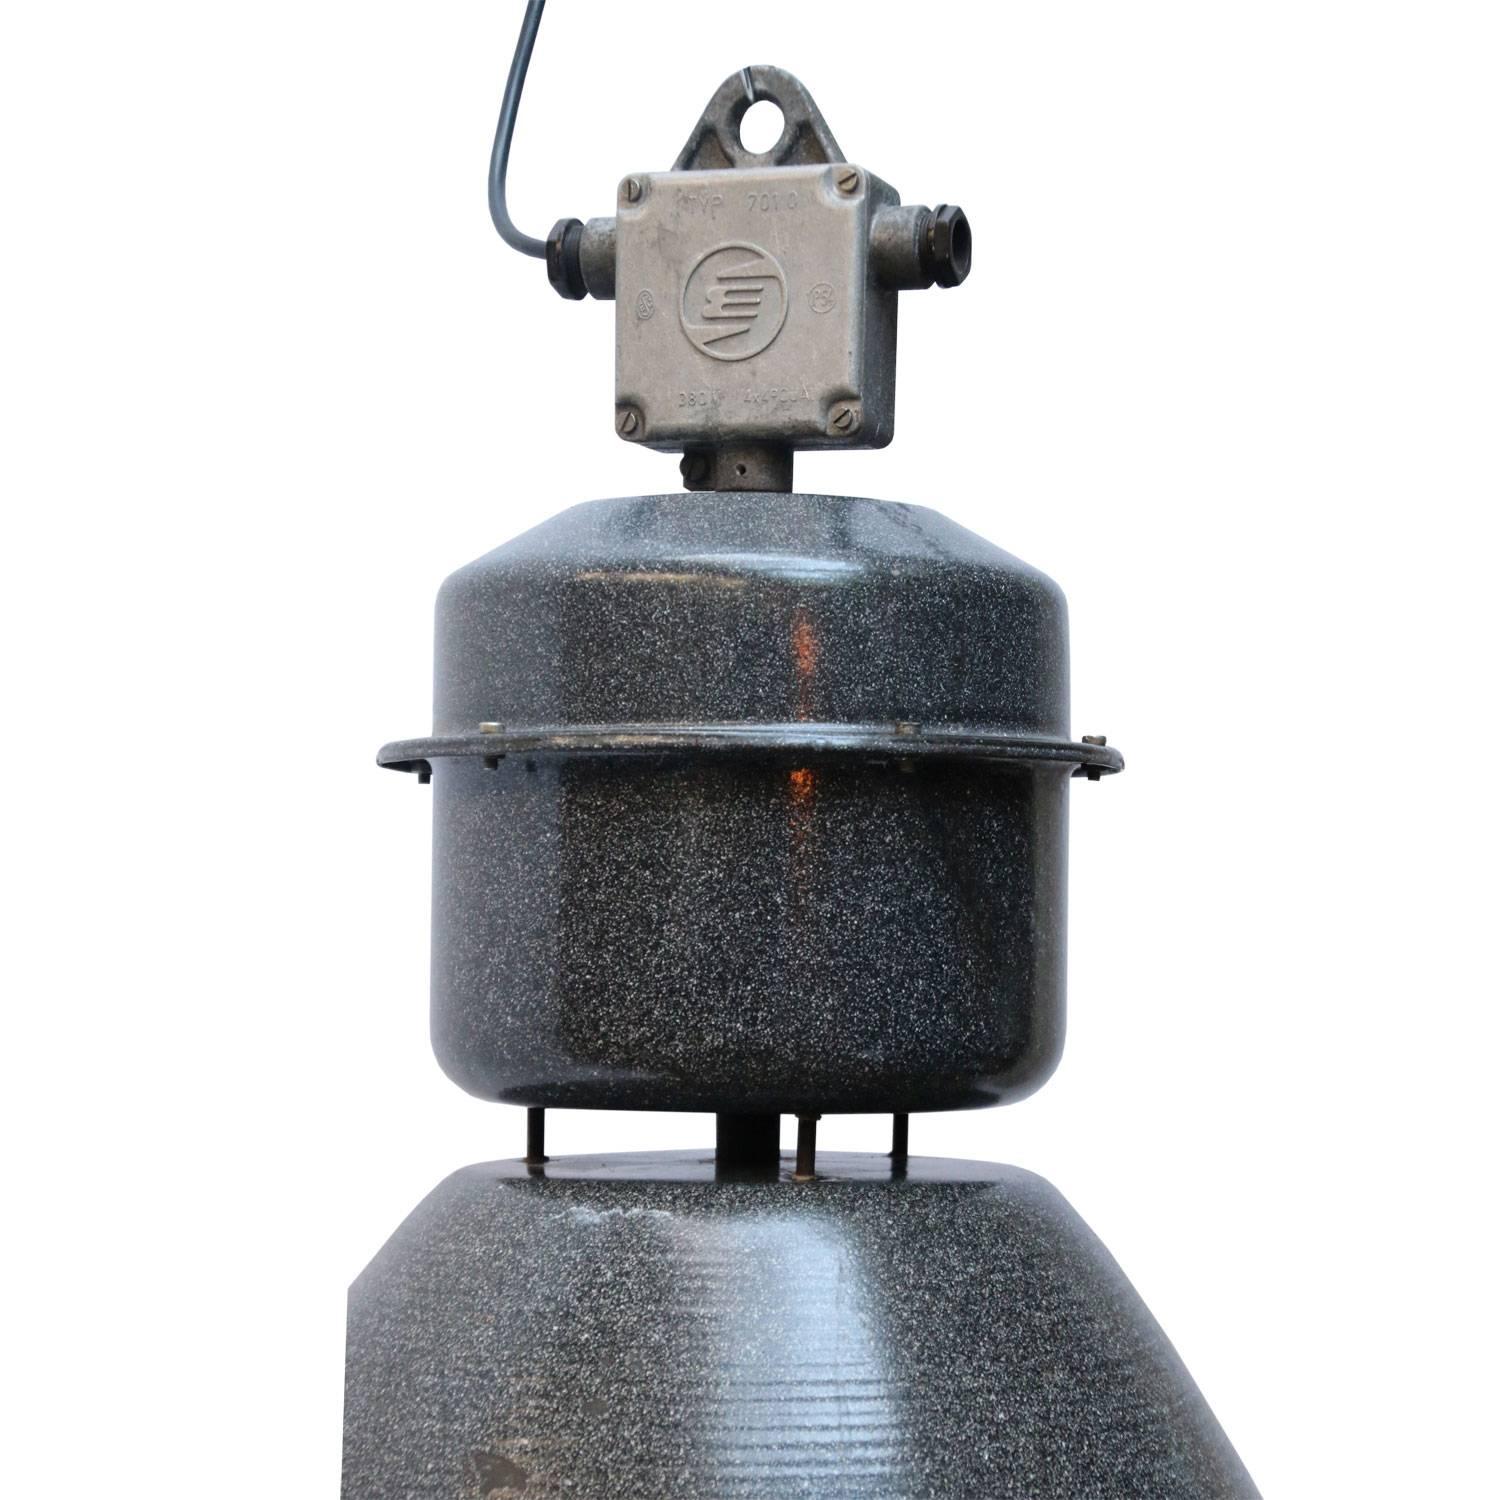 Industrial lamp. Speckled dark/grey enamel white interior.

Weight: 7.5 kg / 16.5 lb

All lamps have been made suitable by international standards for incandescent light bulbs, energy-efficient and LED bulbs. E26/E27 bulb holders and new wiring are